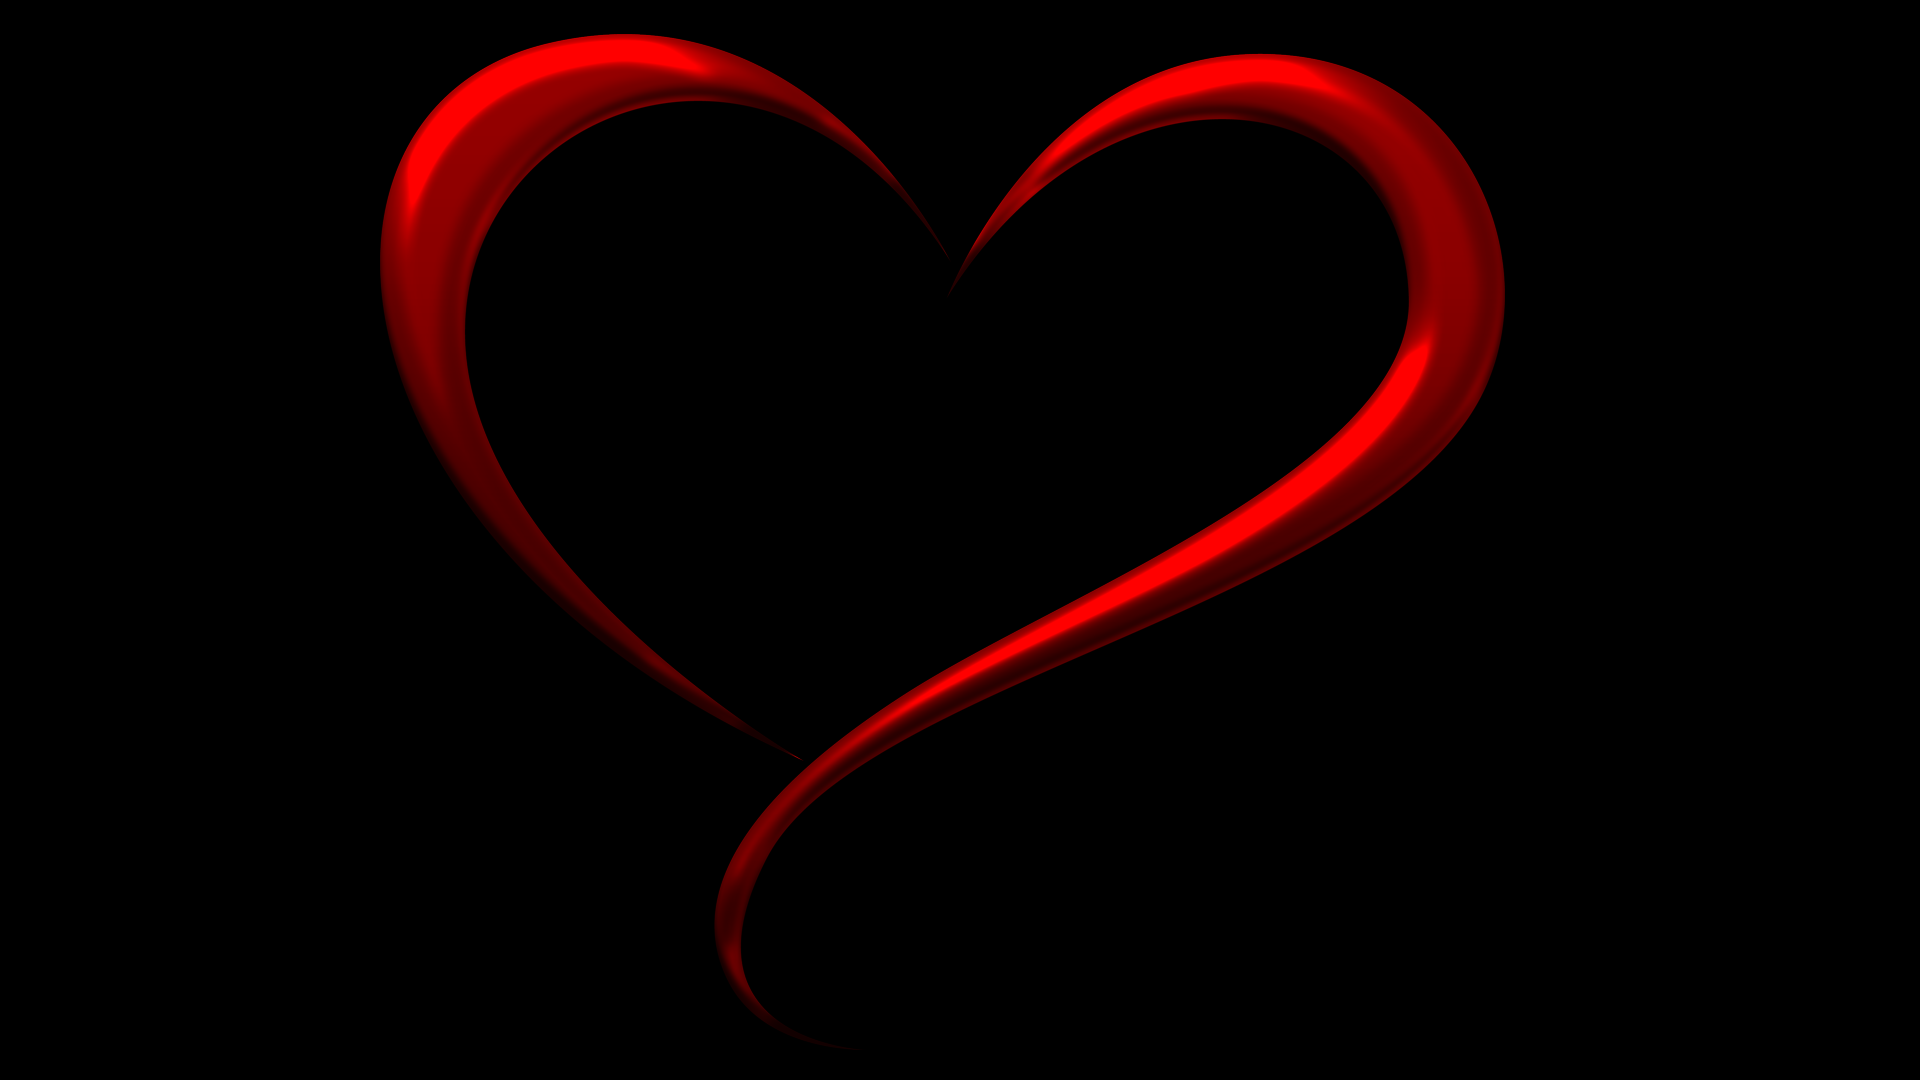 Black and Red Heart Wallpaper Free Black and Red Heart Background